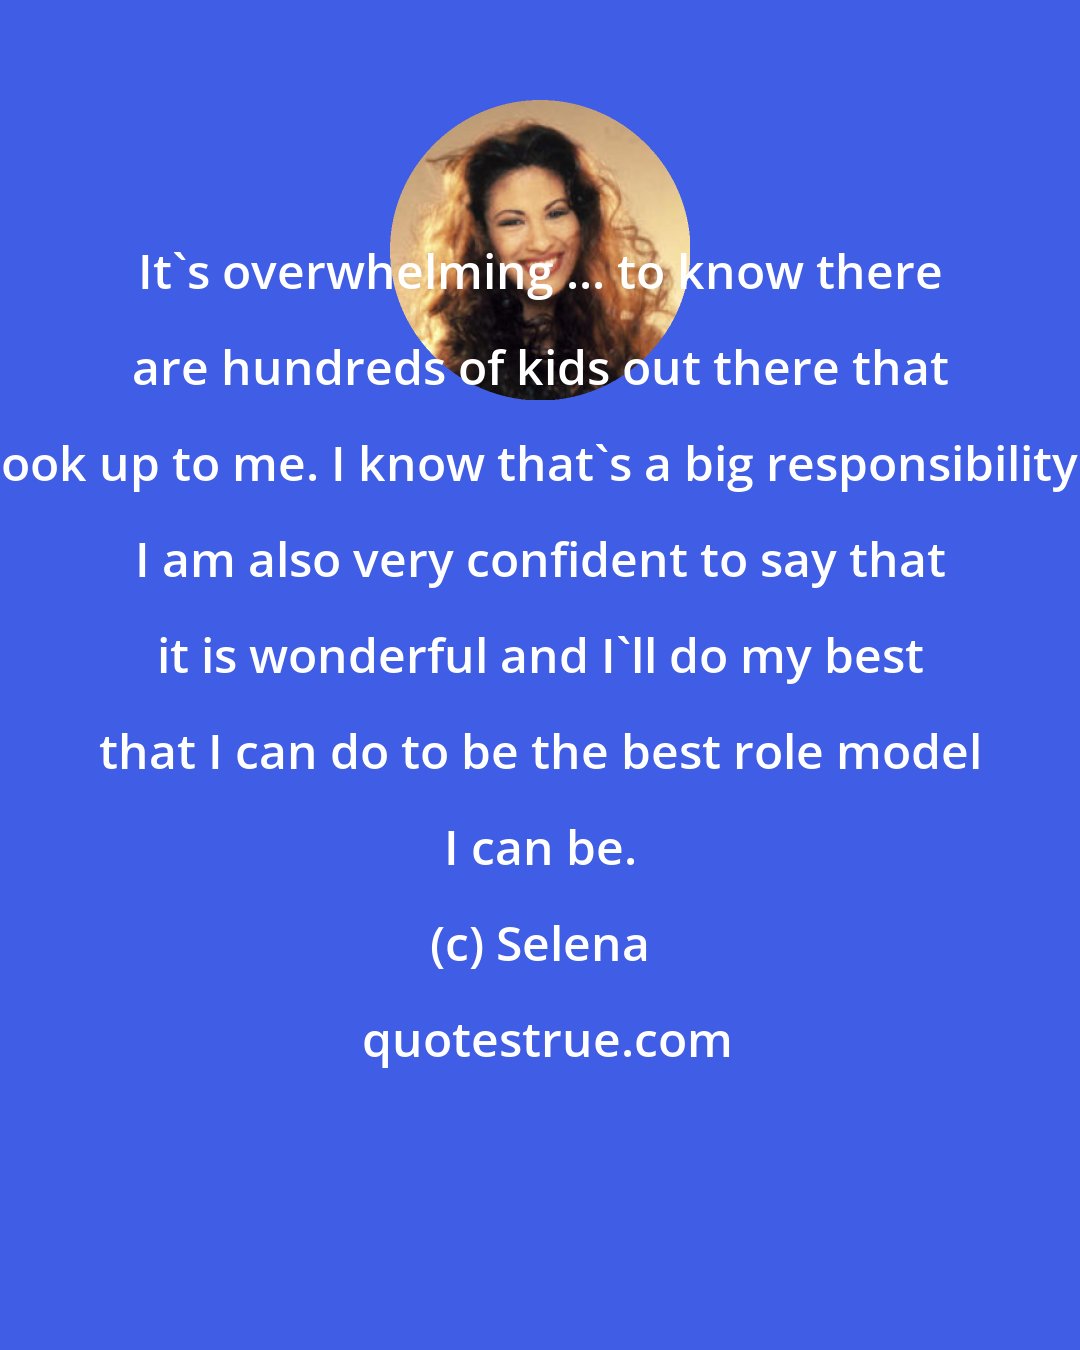 Selena: It's overwhelming ... to know there are hundreds of kids out there that look up to me. I know that's a big responsibility. I am also very confident to say that it is wonderful and I'll do my best that I can do to be the best role model I can be.